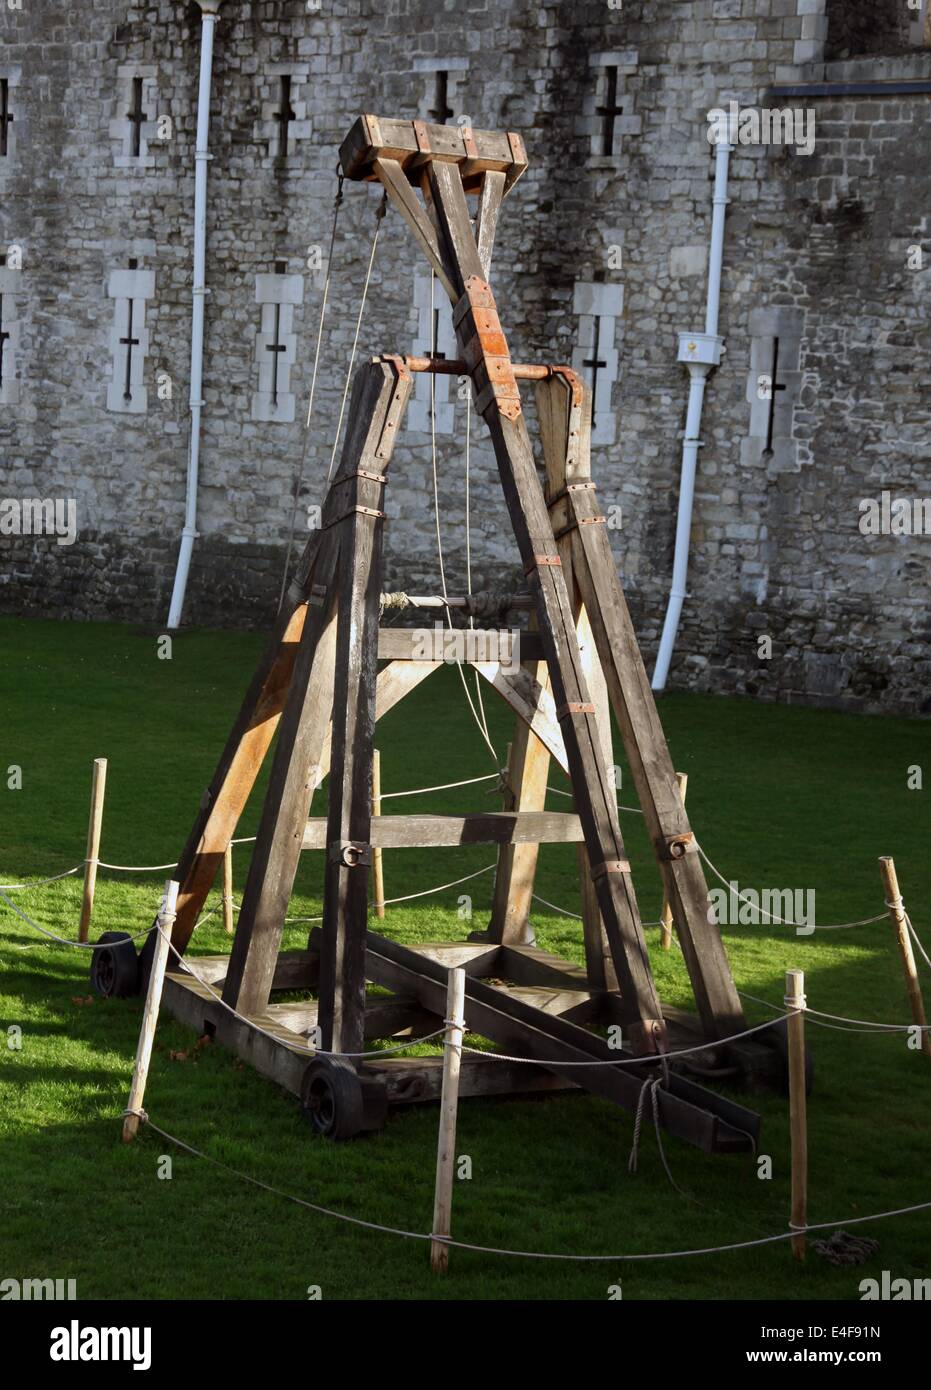 It's a photo of a catapult in wood from the middle age. It's at the entrance of the tower of London in England It's for exibit' Stock Photo